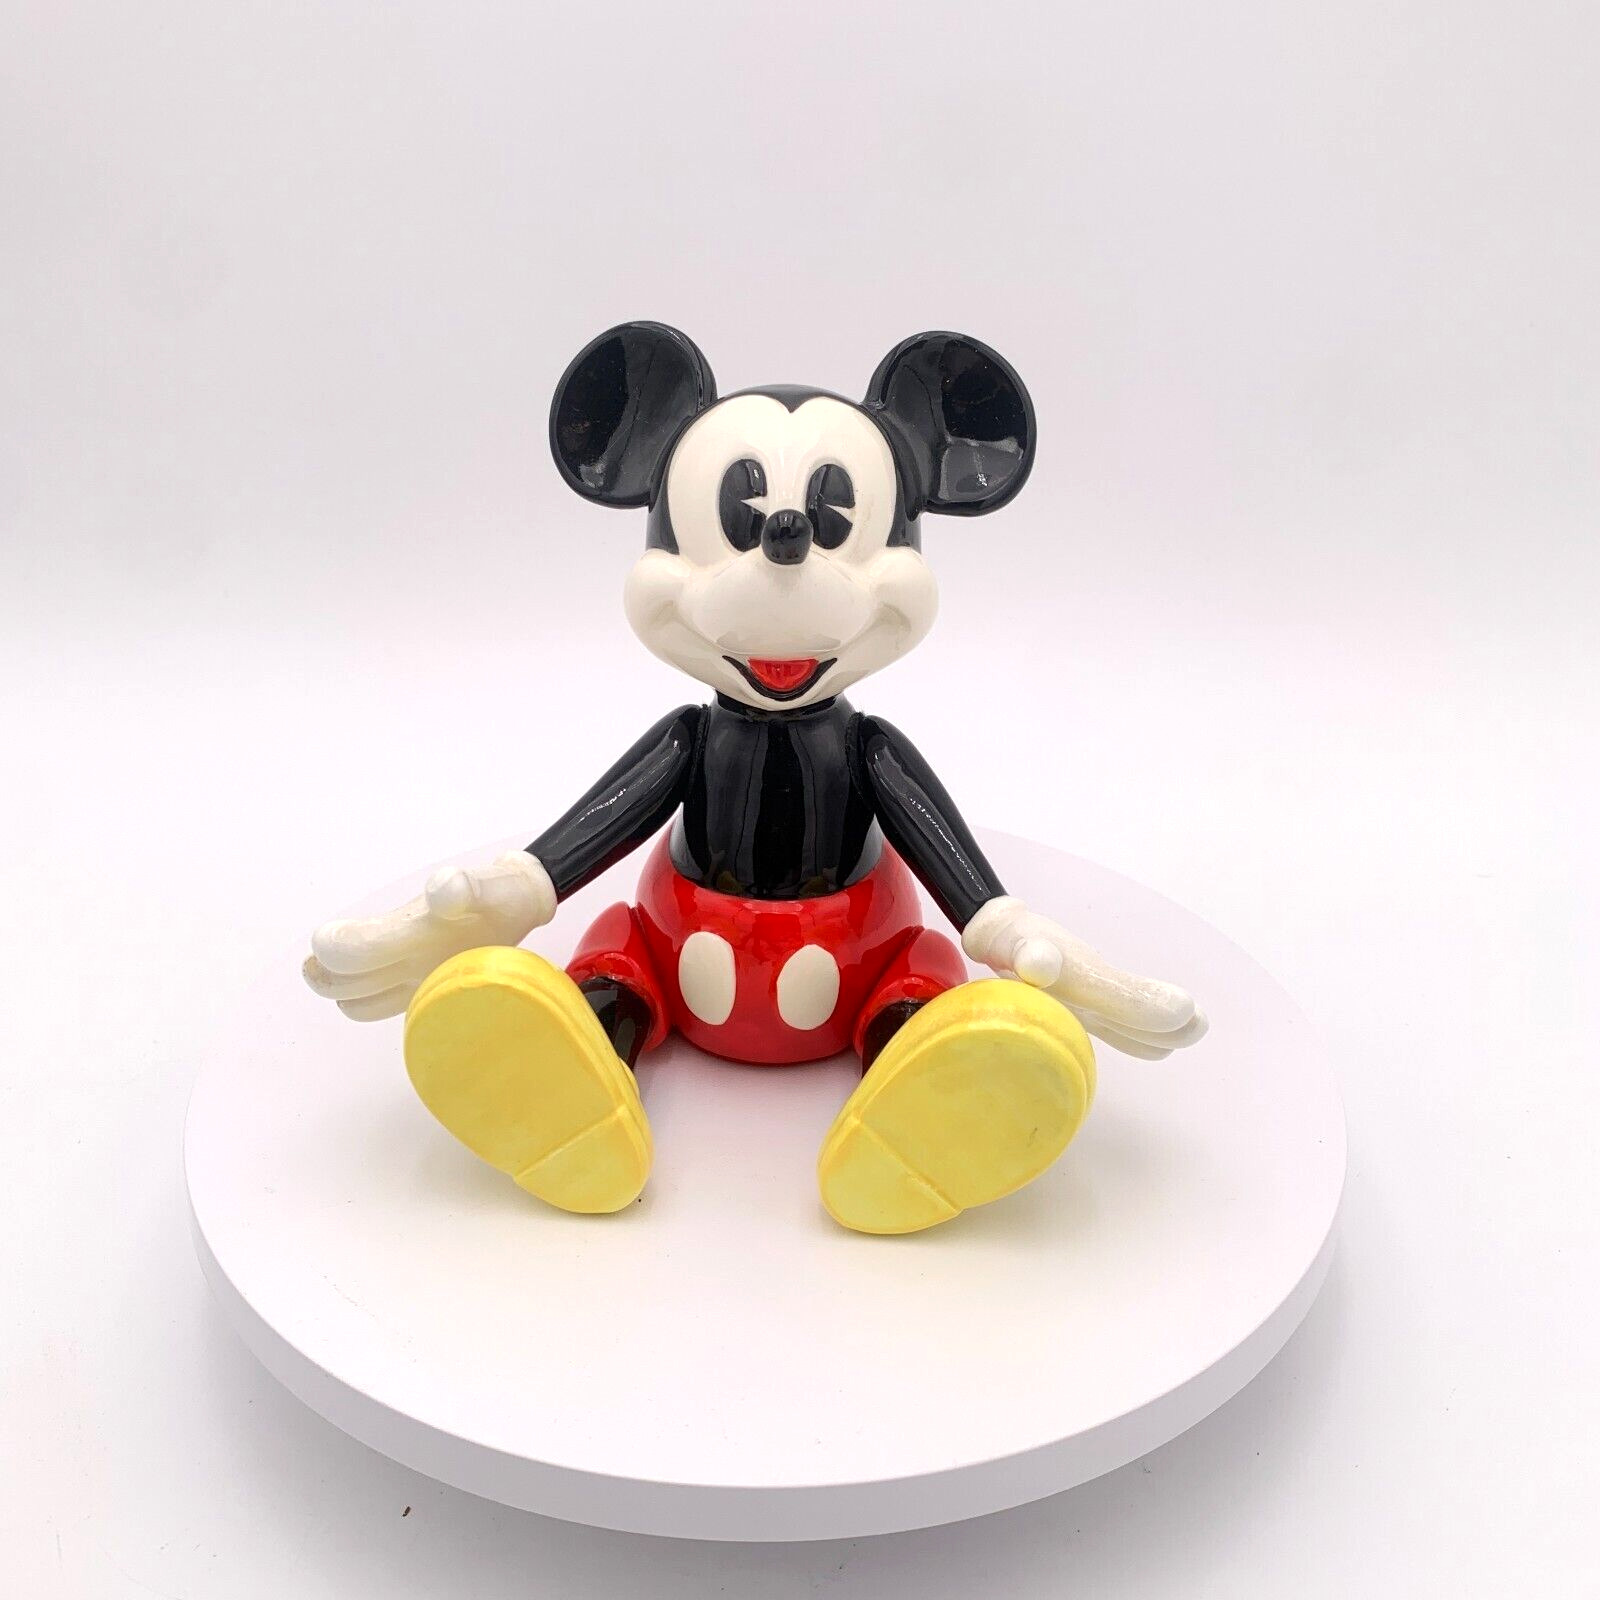 Vintage Disney Mickey Mouse Music Box by Schmid - Plays Mickey Mouse Club March